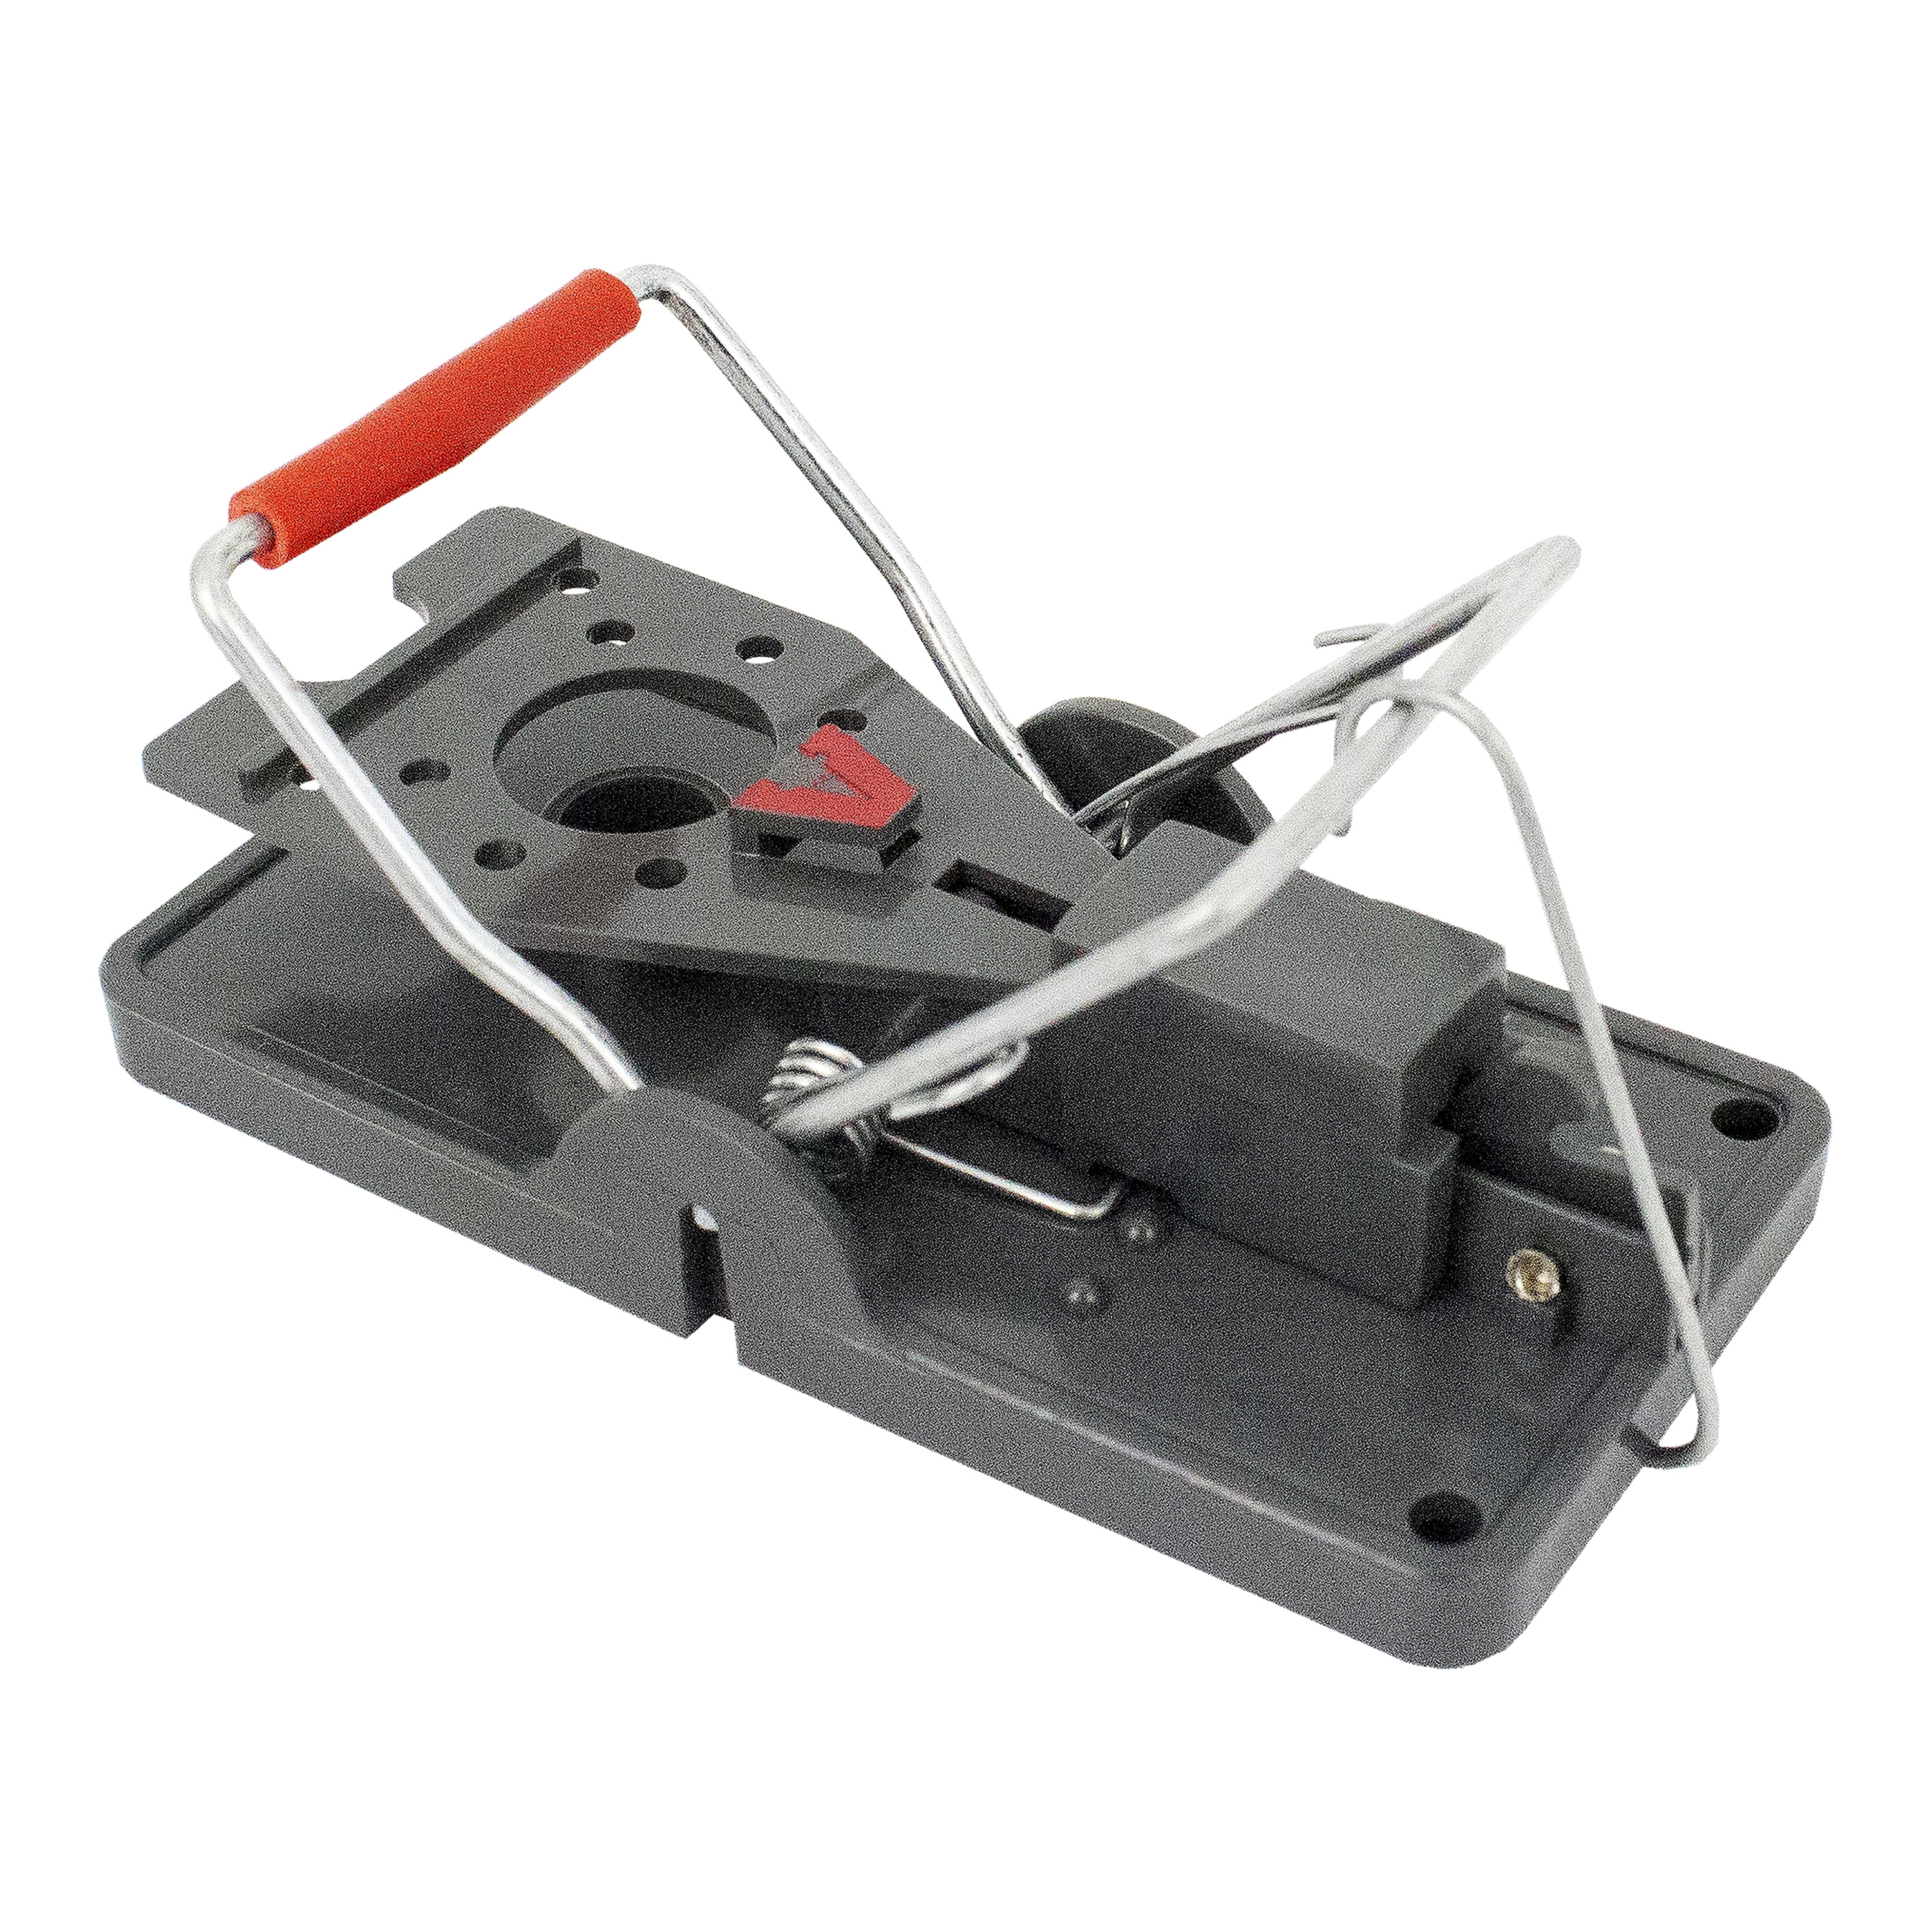 Victor Power Kill High Impact Mouse Trap 3D Model $29 - .3ds